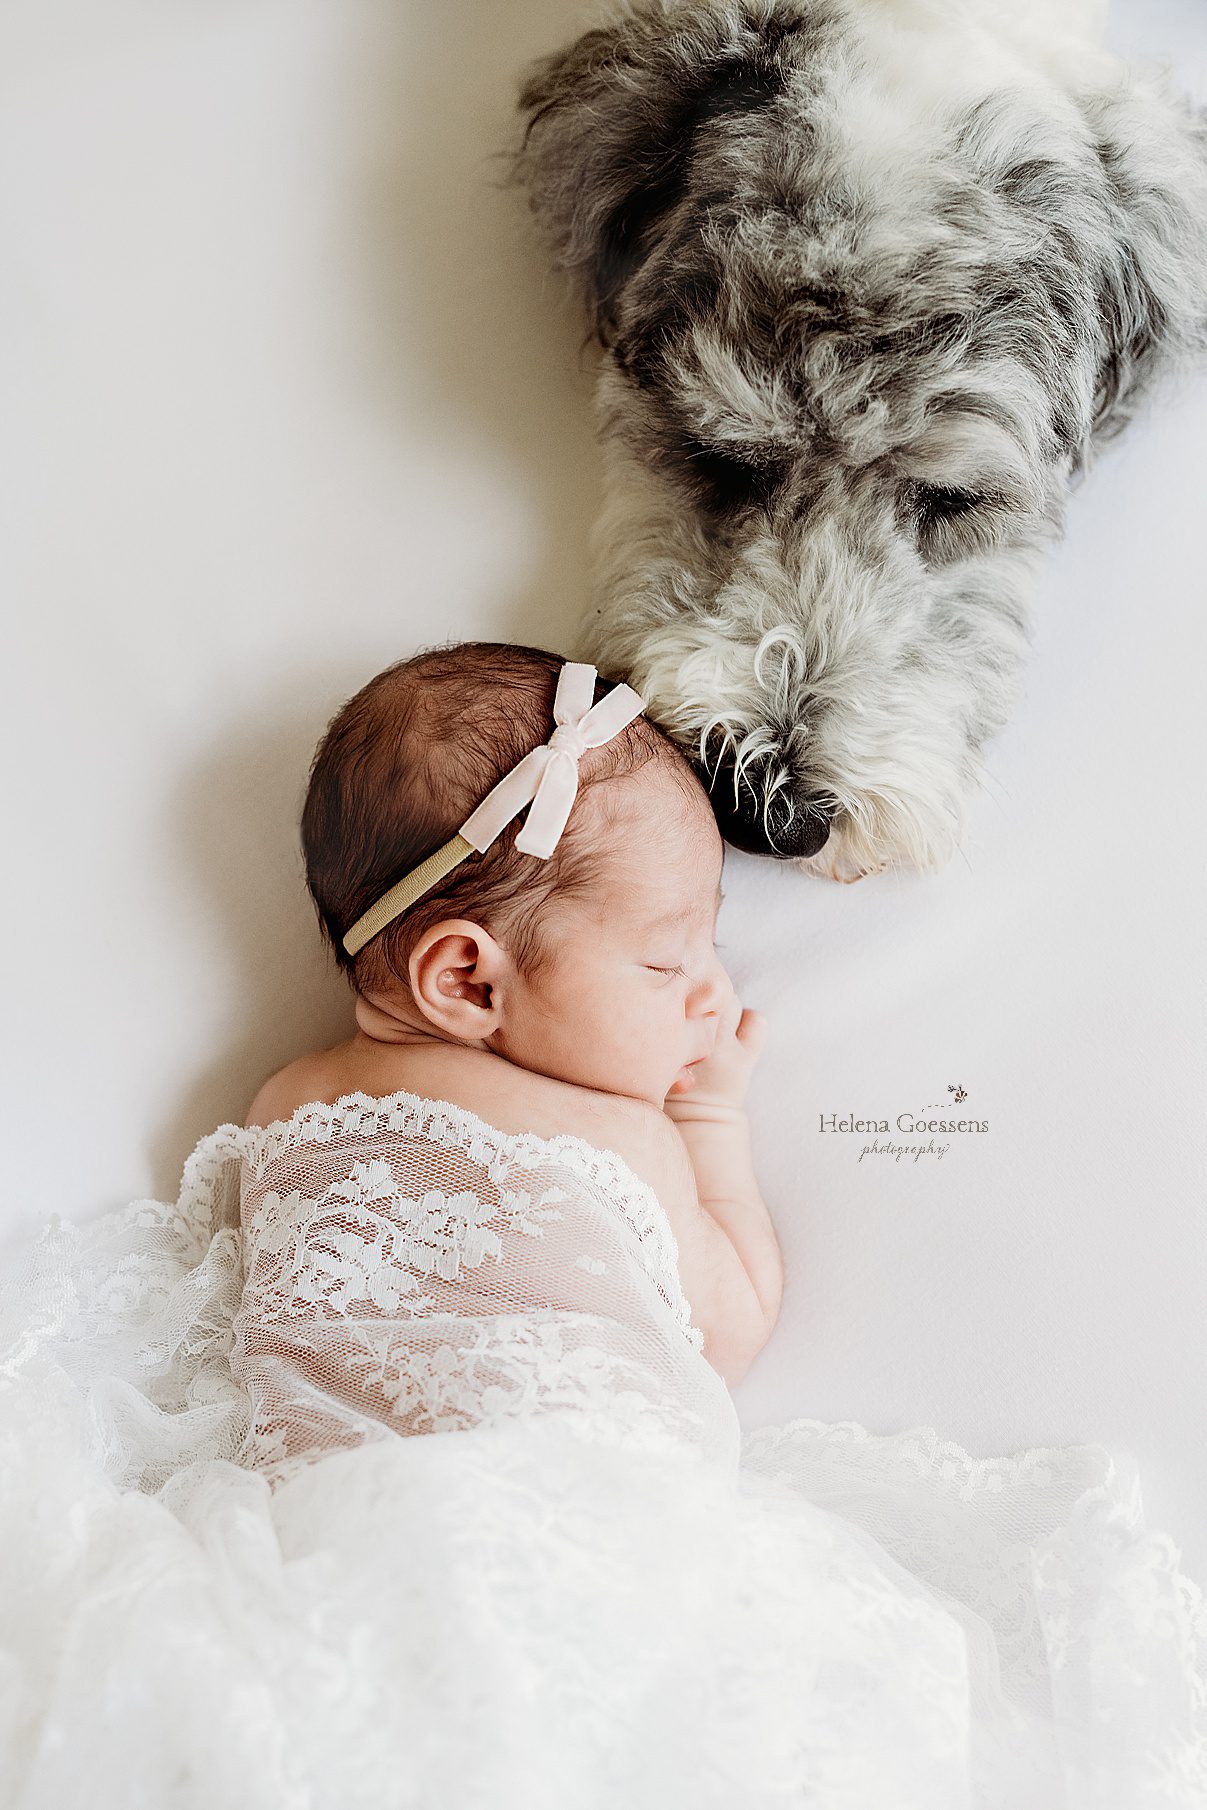 baby lays on bed with lace blanket with dog leaning on her head during Newborn Session in Needham MA